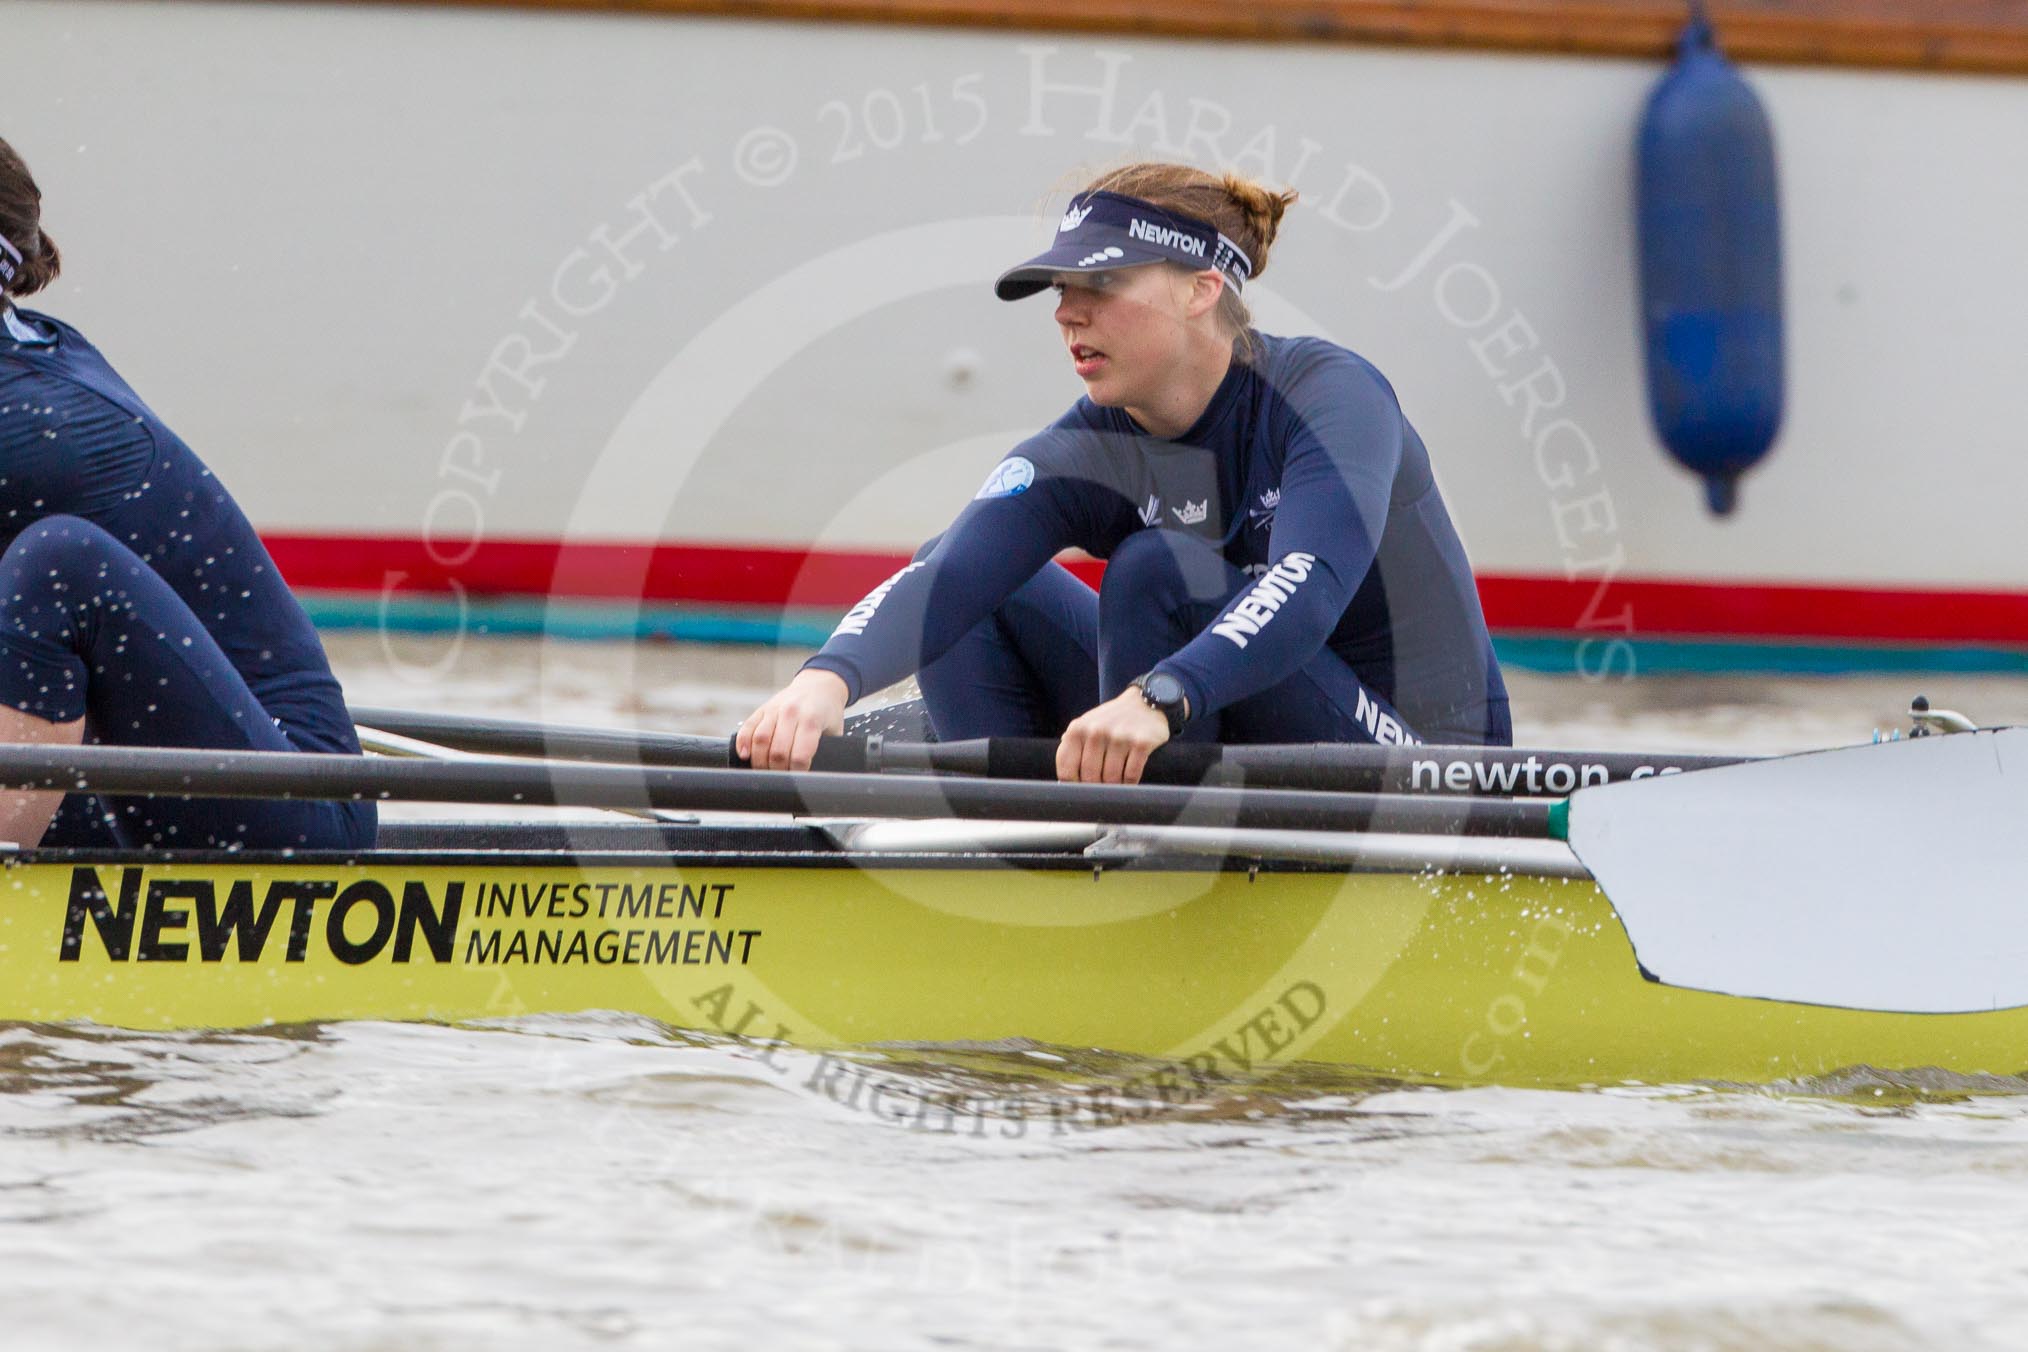 The Boat Race season 2016 - Women's Boat Race Trial Eights (OUWBC, Oxford): "Charybdis", here bow-Georgie Daniell.
River Thames between Putney Bridge and Mortlake,
London SW15,

United Kingdom,
on 10 December 2015 at 12:19, image #155